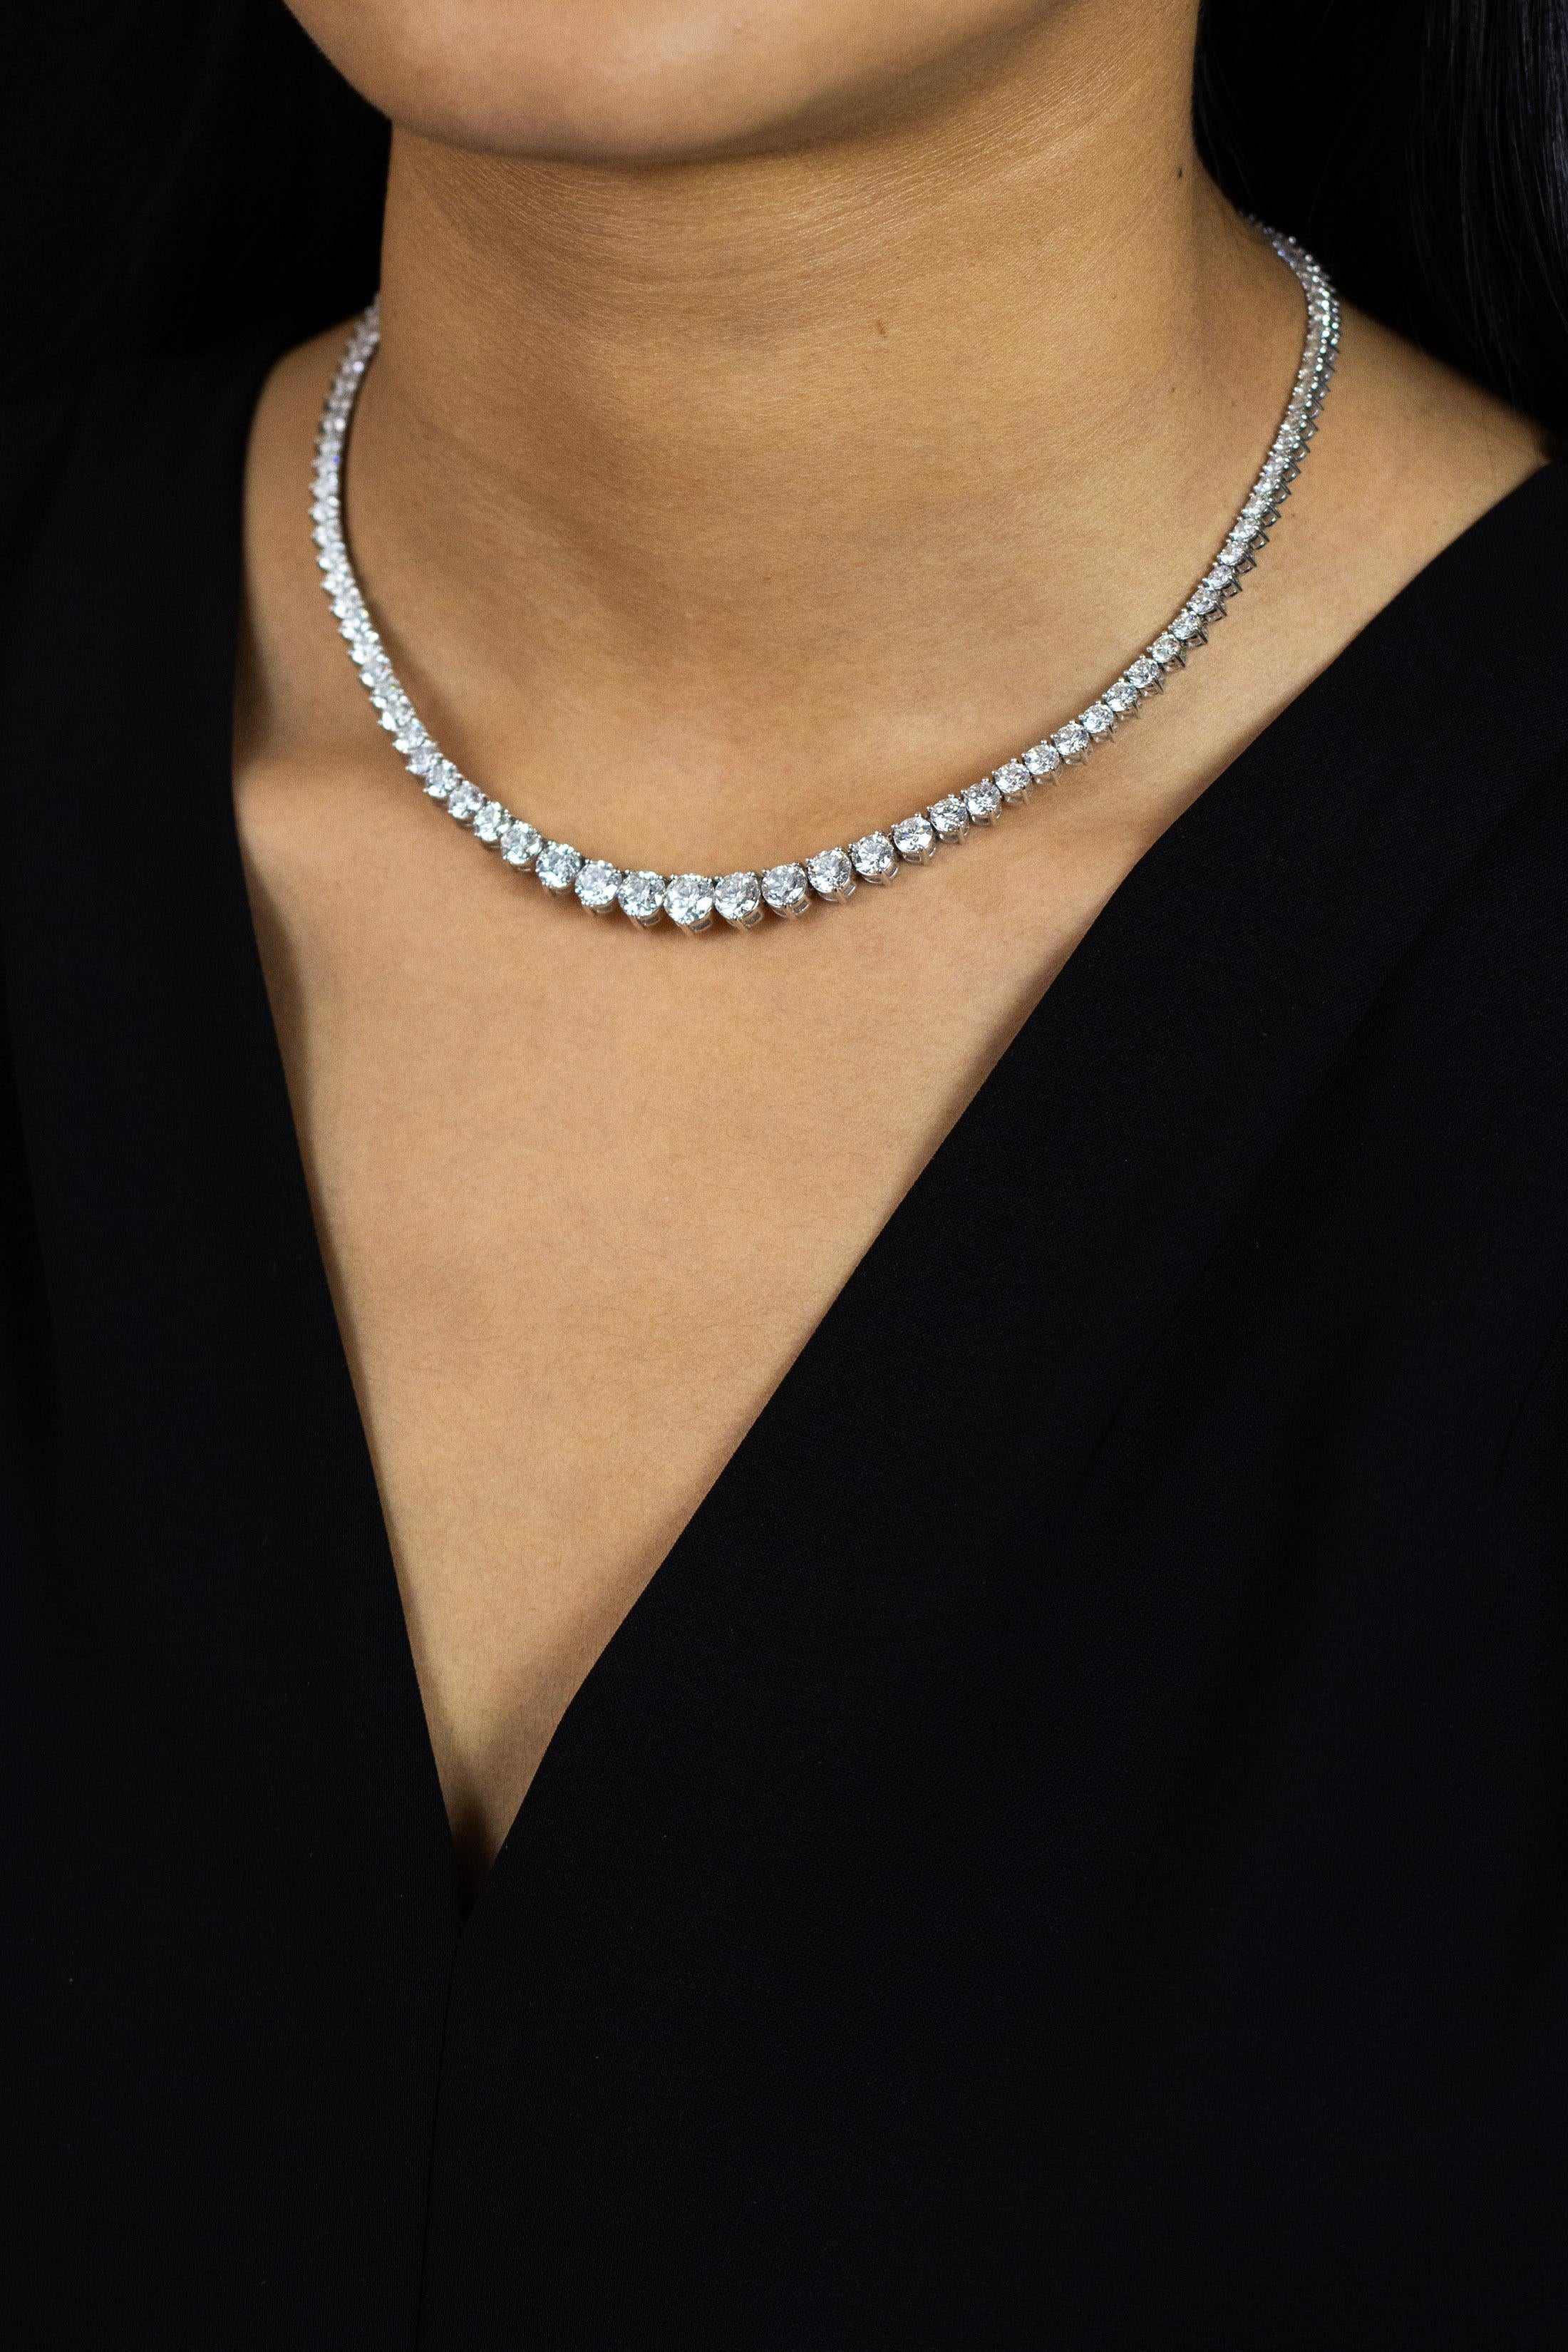 Roman Malakov 18 Carats Total Graduating Round Diamond Riviere Tennis Necklace In New Condition For Sale In New York, NY